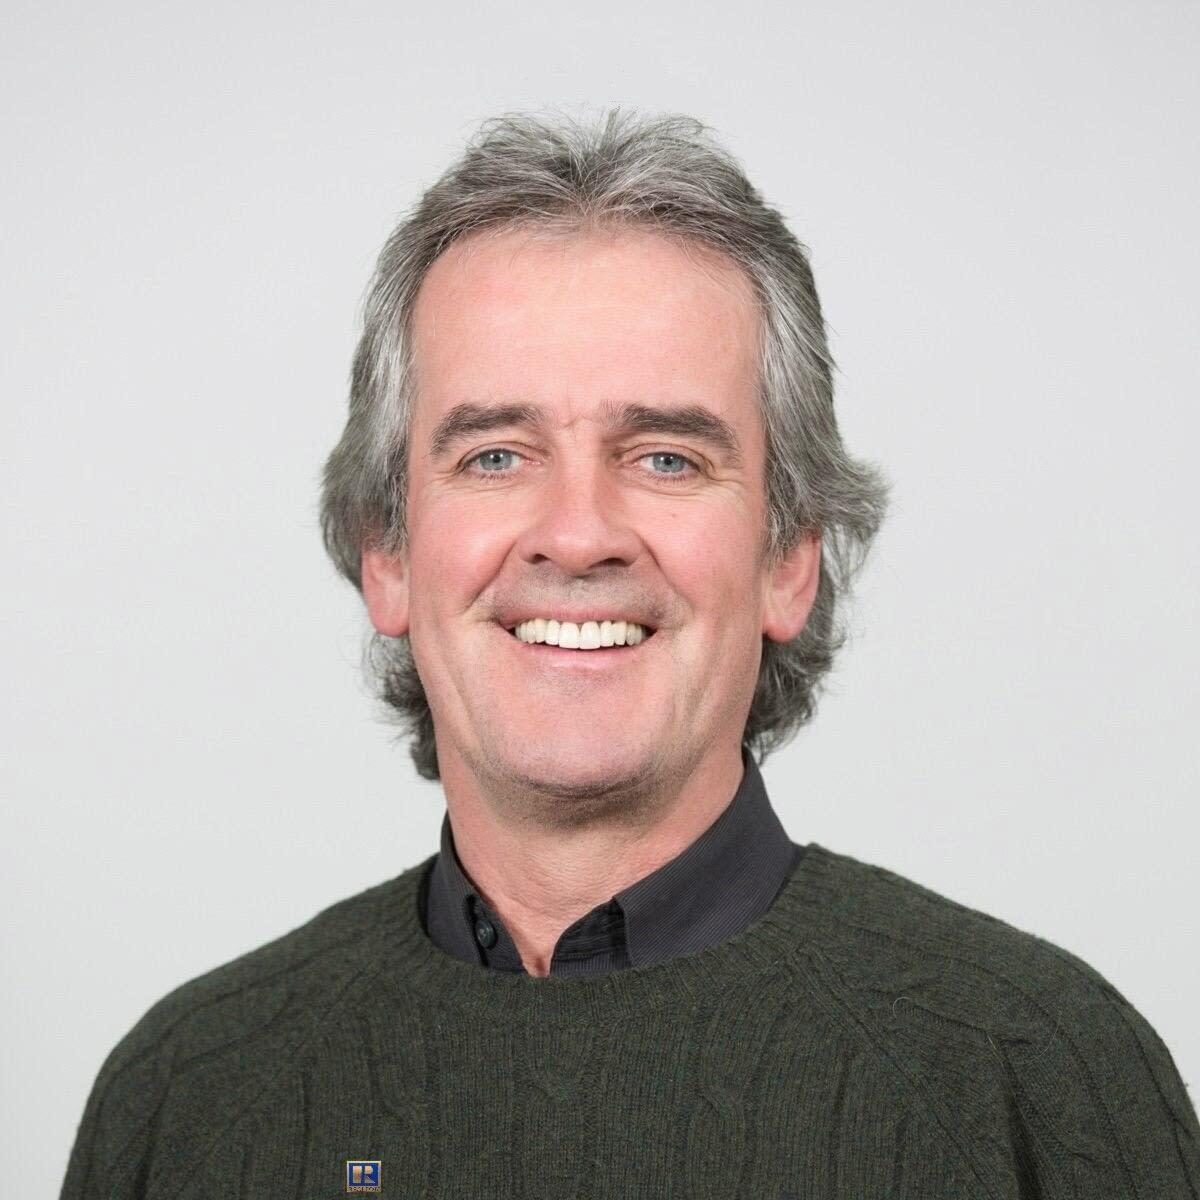 A smiling man with graying hair wearing a green sweater